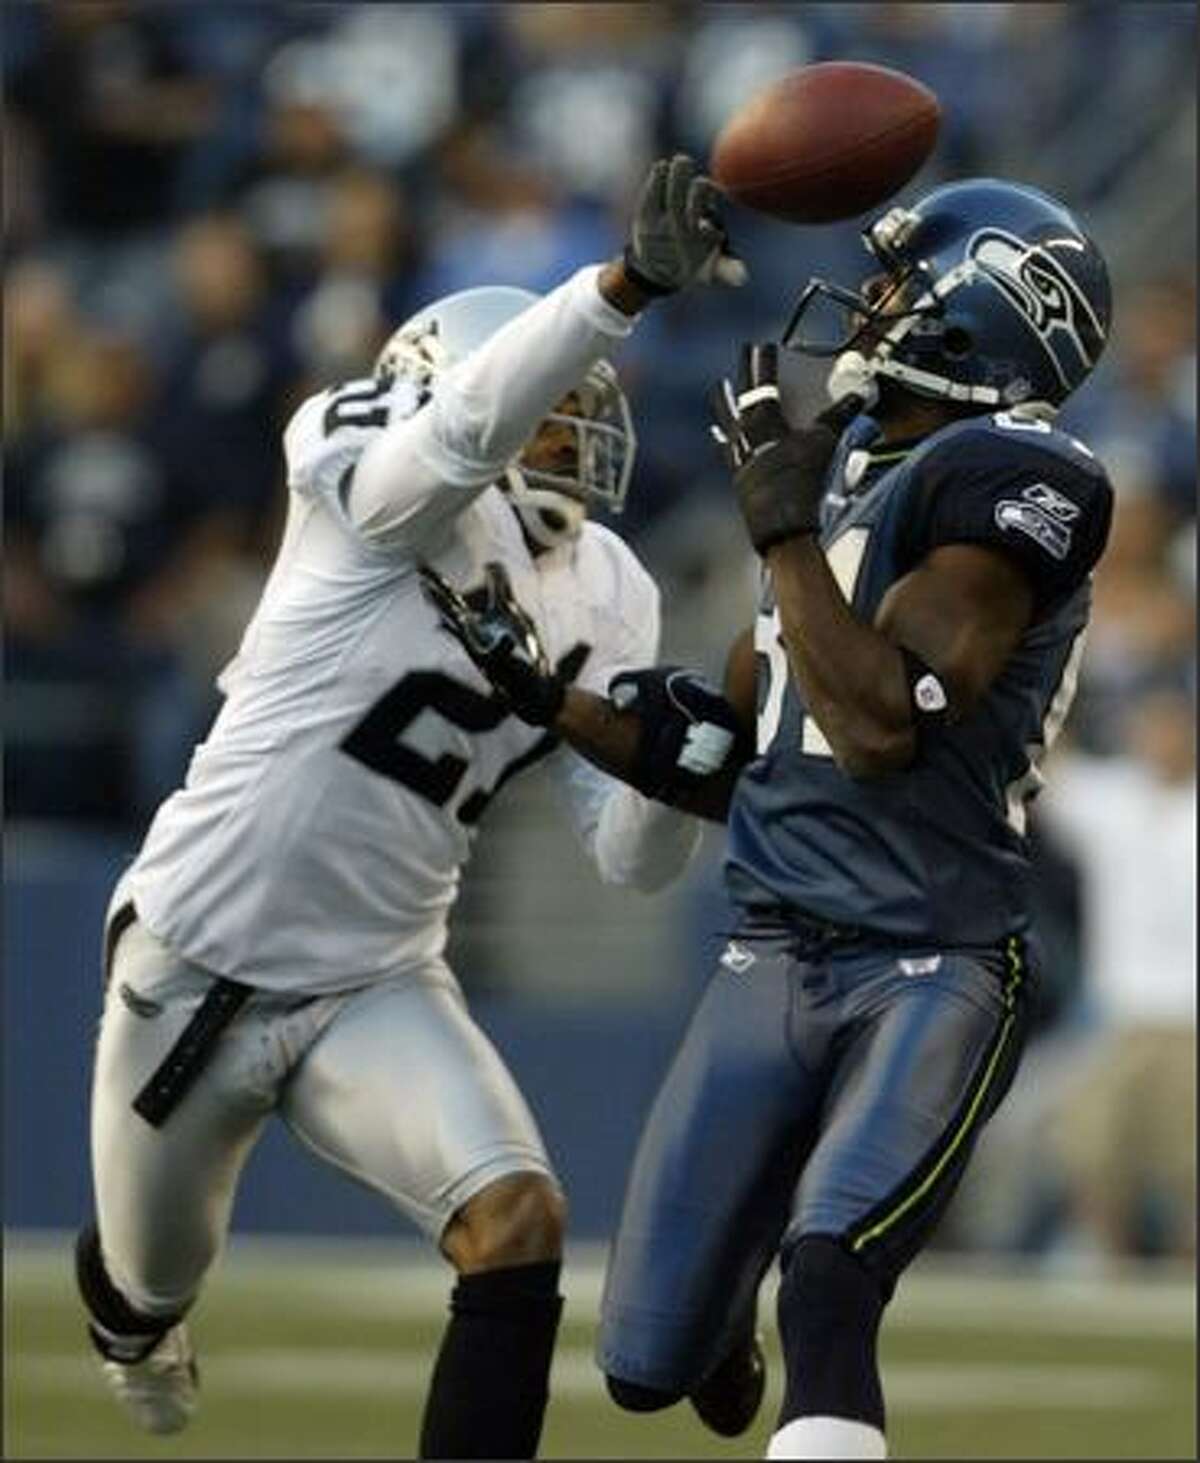 The Seahawks' Nate Burleson (right) has the ball knocked away by Oakland's Nnamdi Asomugha in the first quarter.